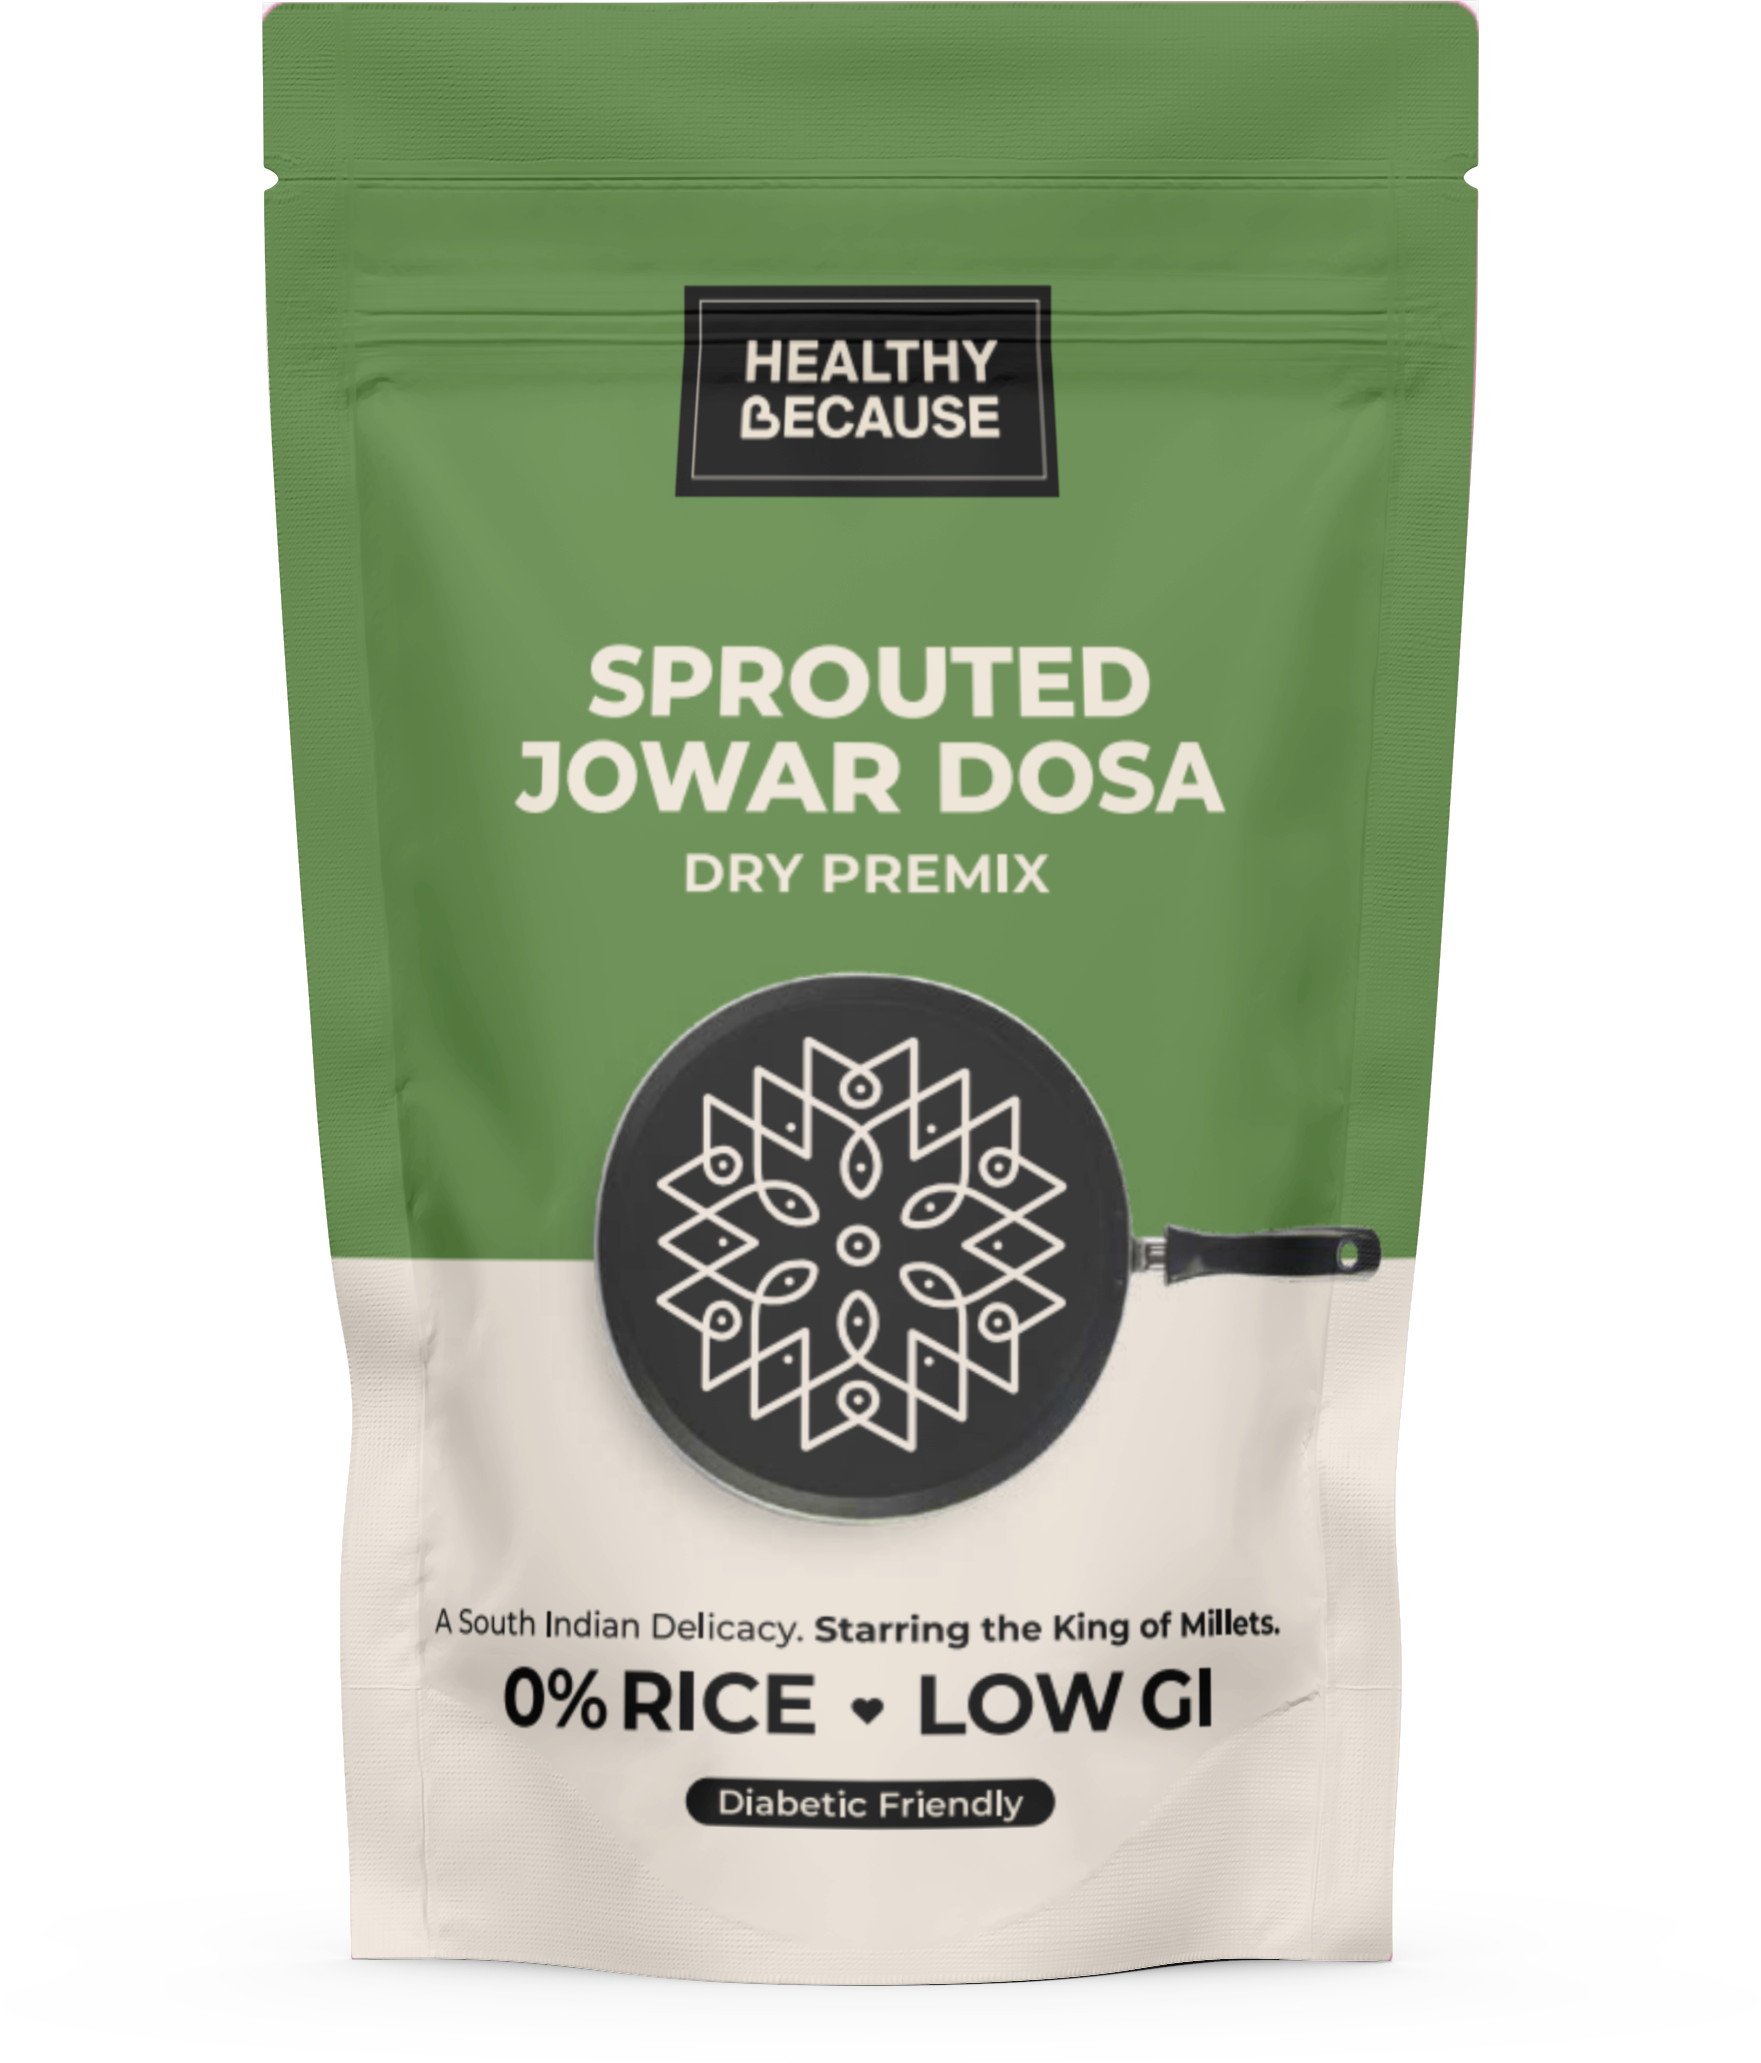 Sprouted Jowar Dosa Premix – Healthy Because